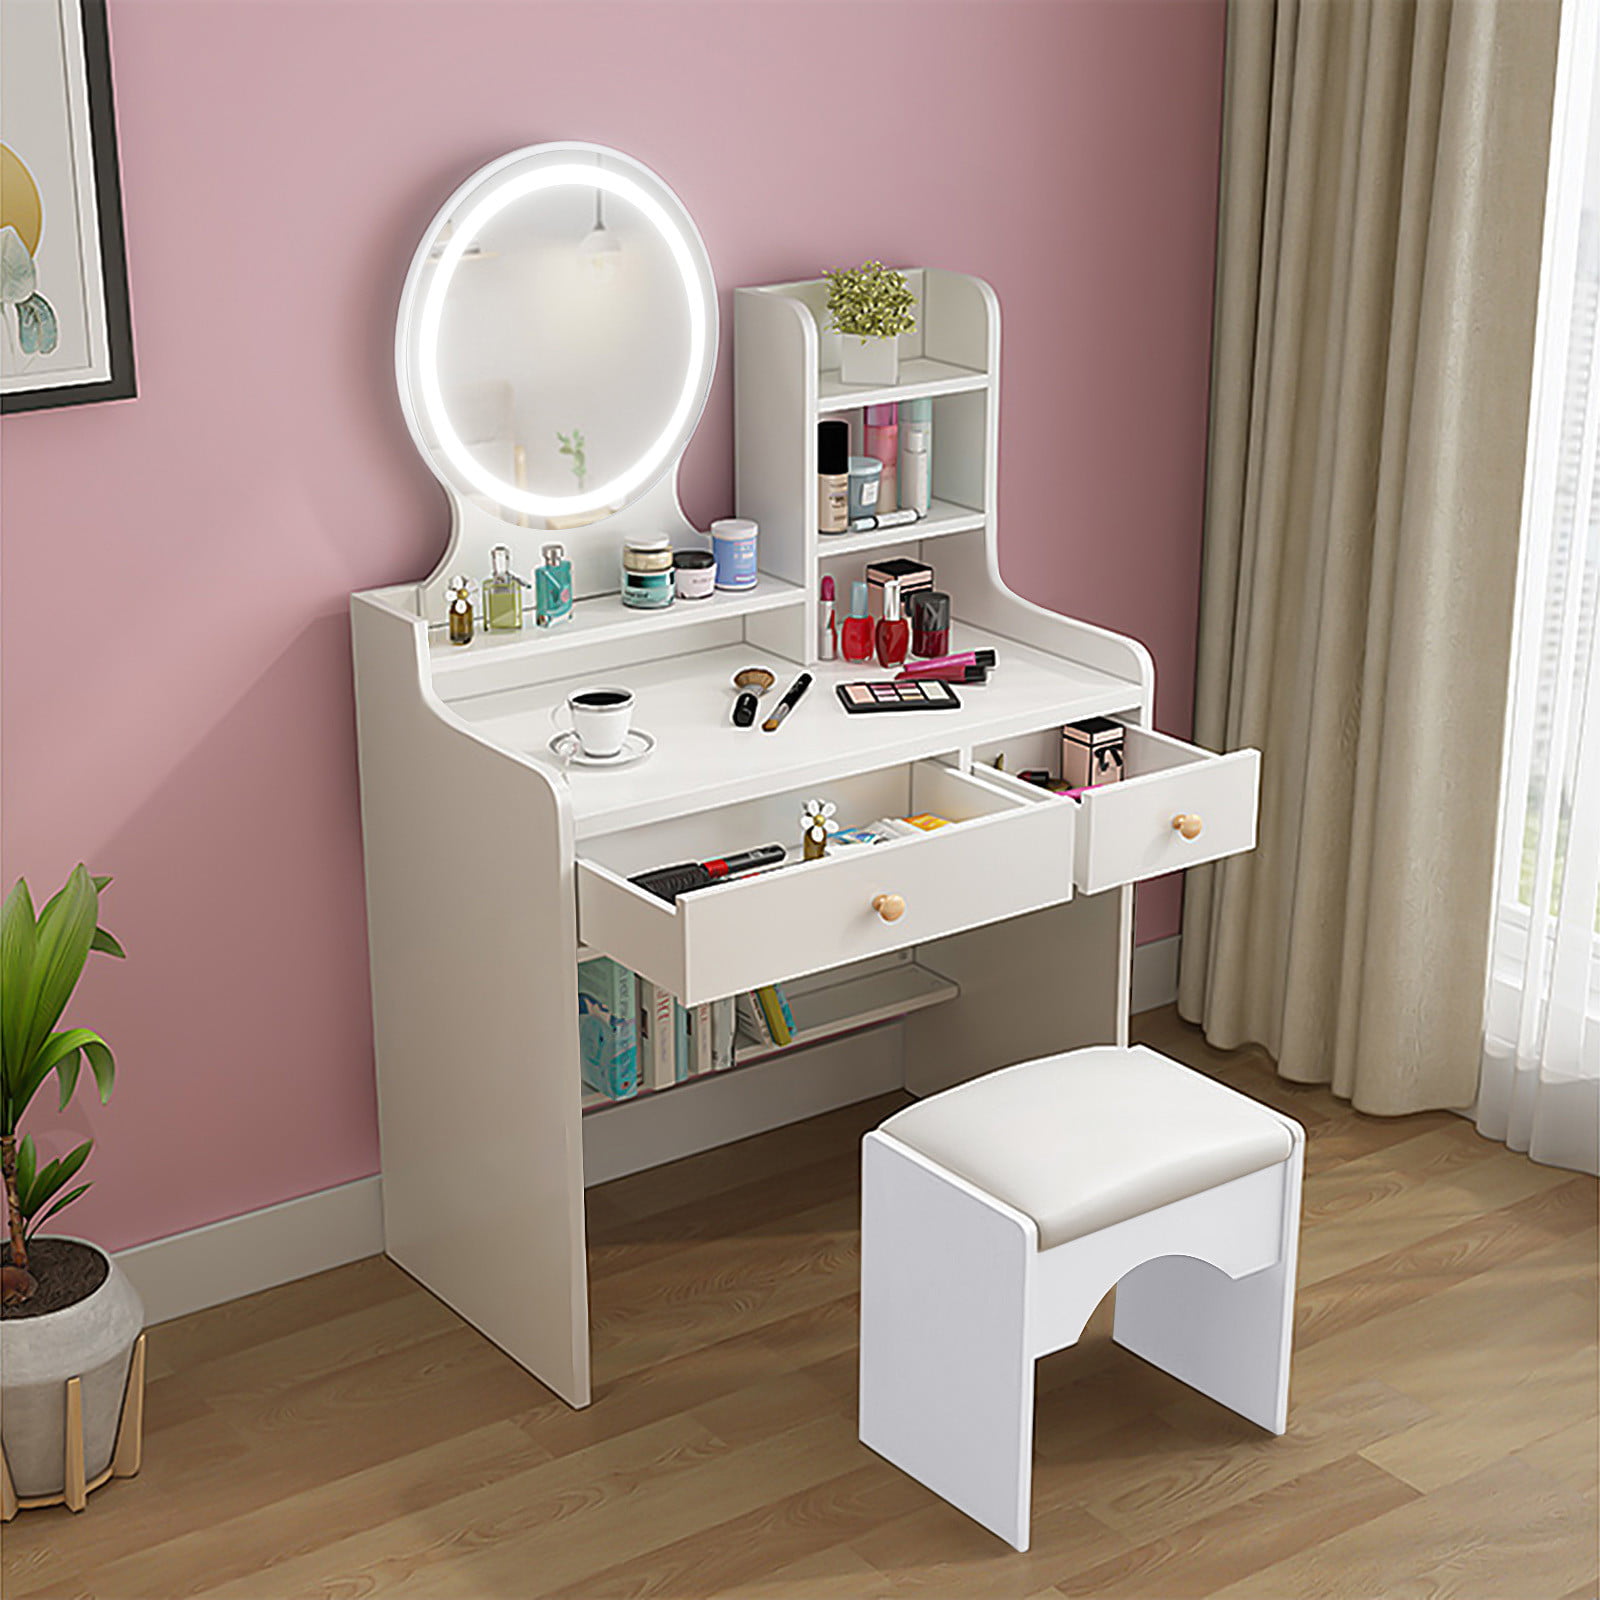 Details about   Vanity Set with Lighted Mirror Makeup Dressing Table+LED Light+Stool W/Drawer US 